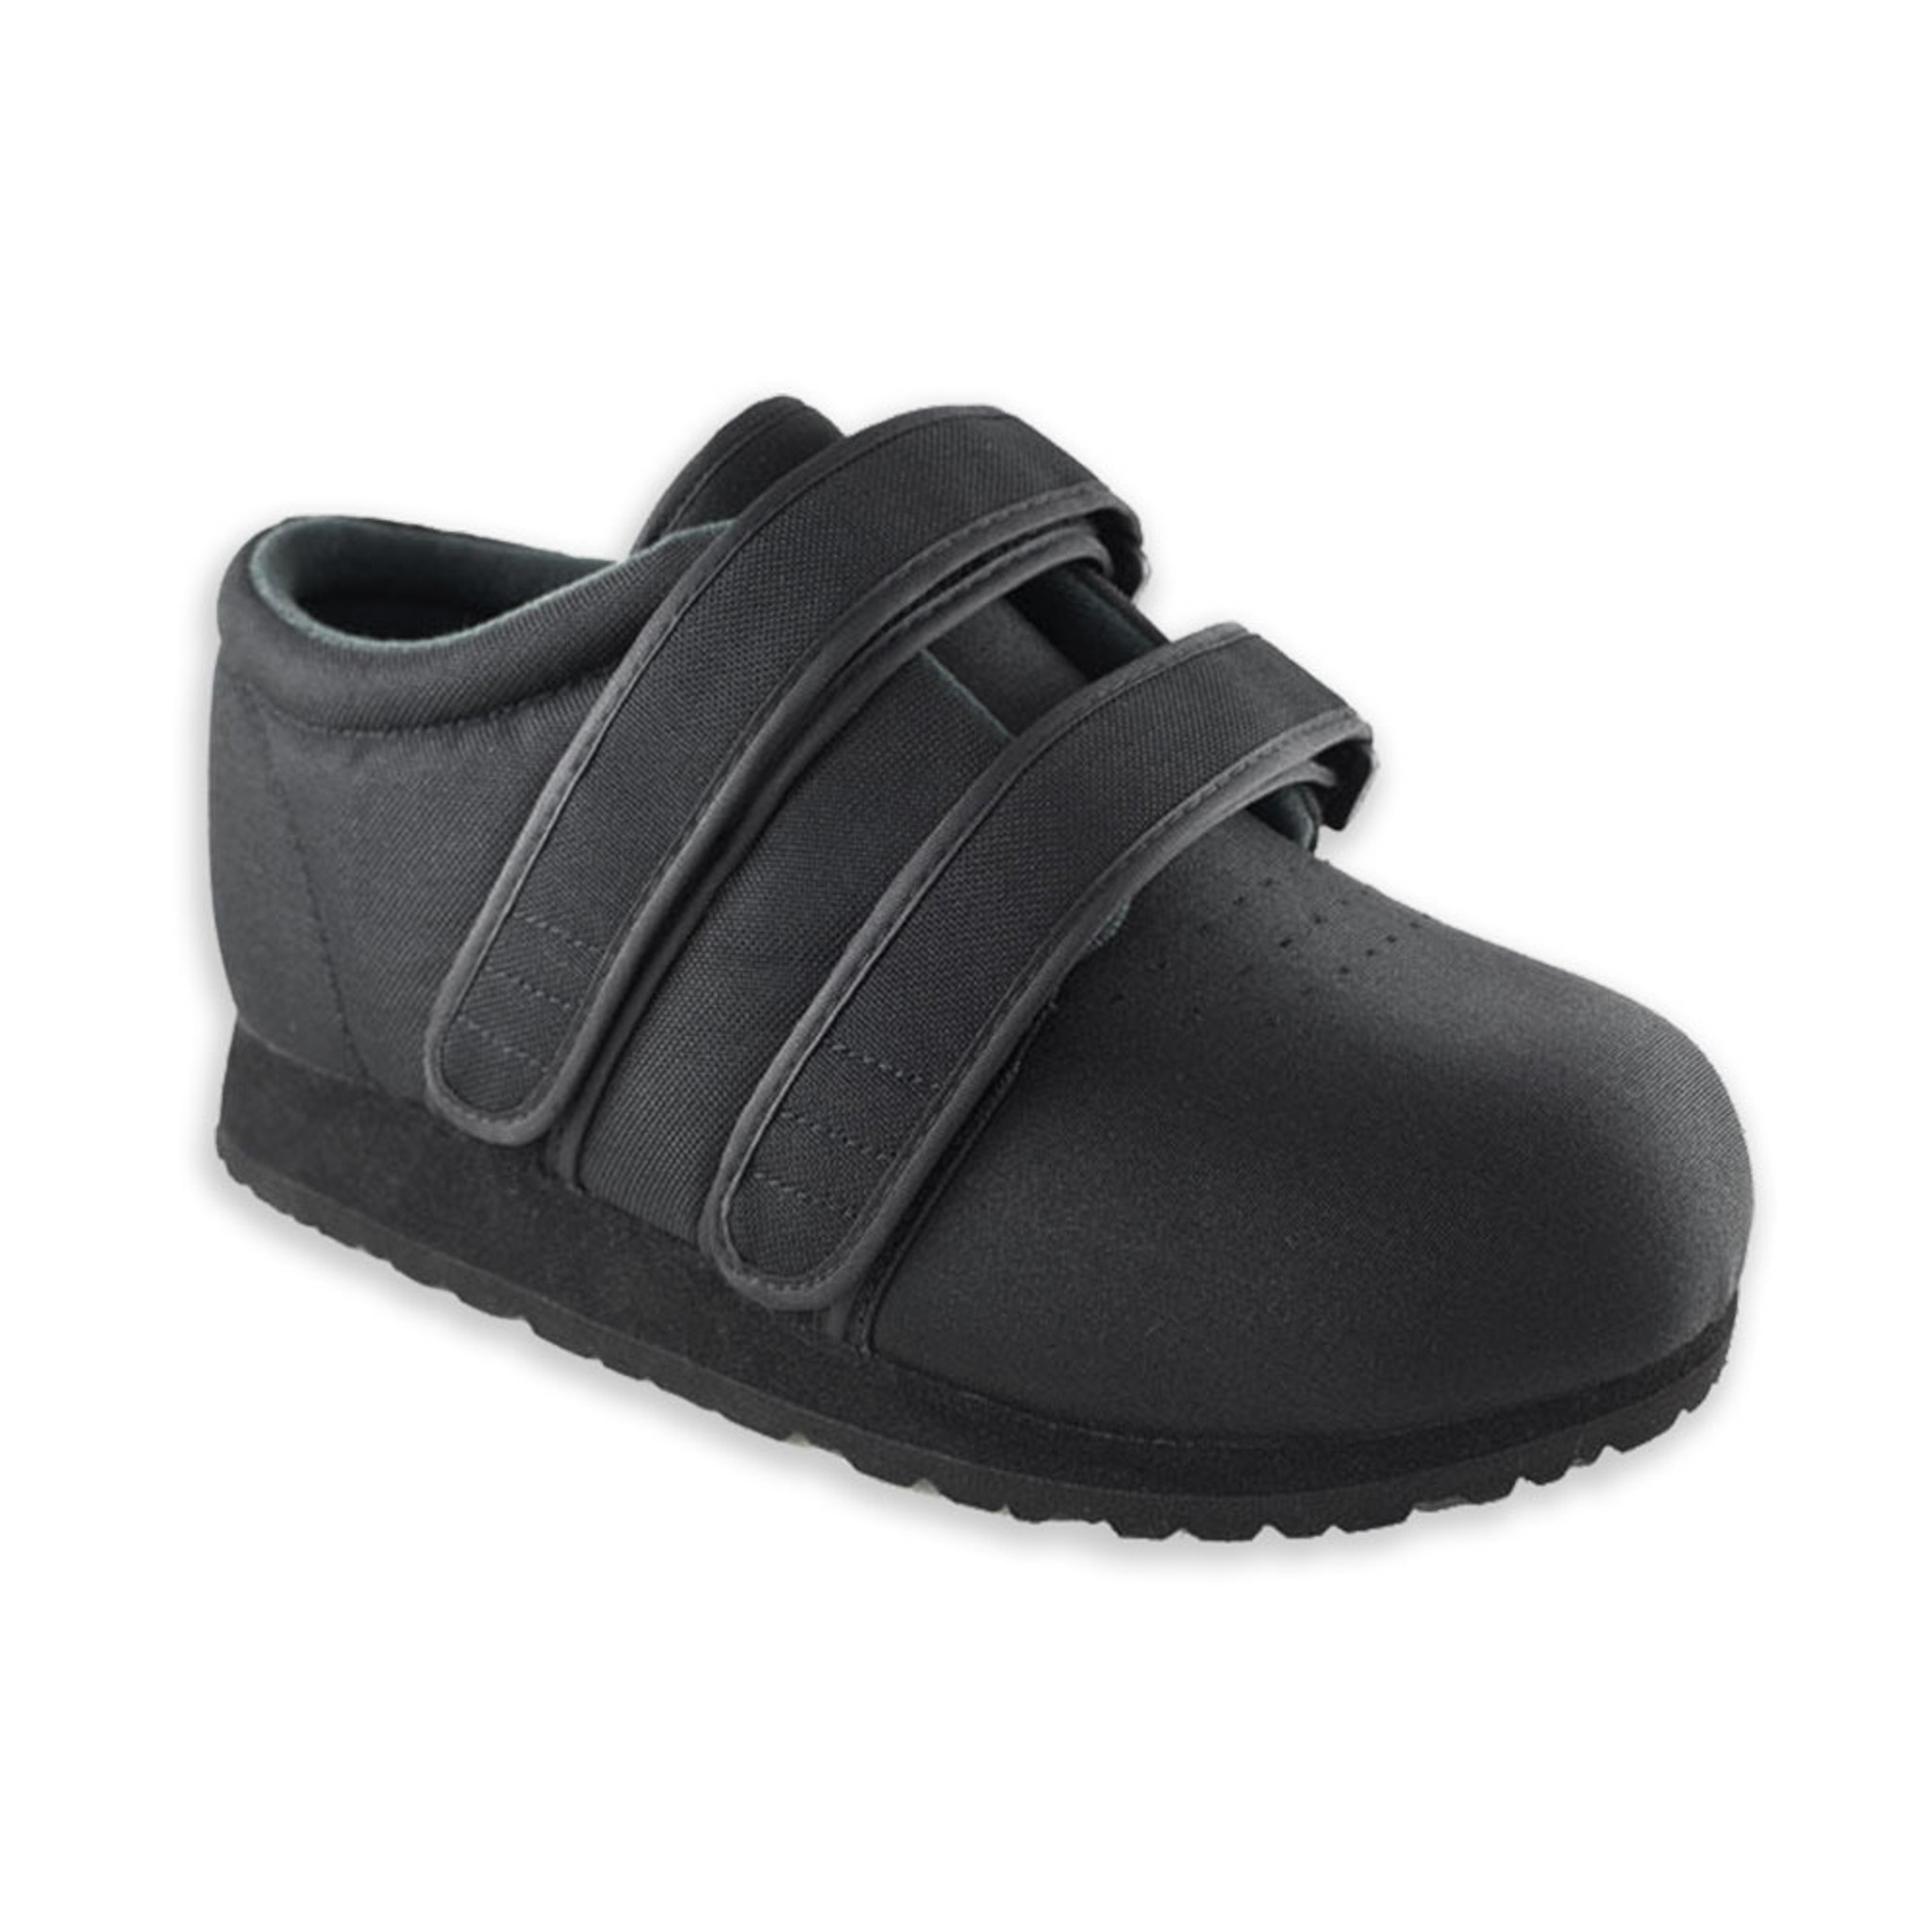 fully enclosed black leather shoes